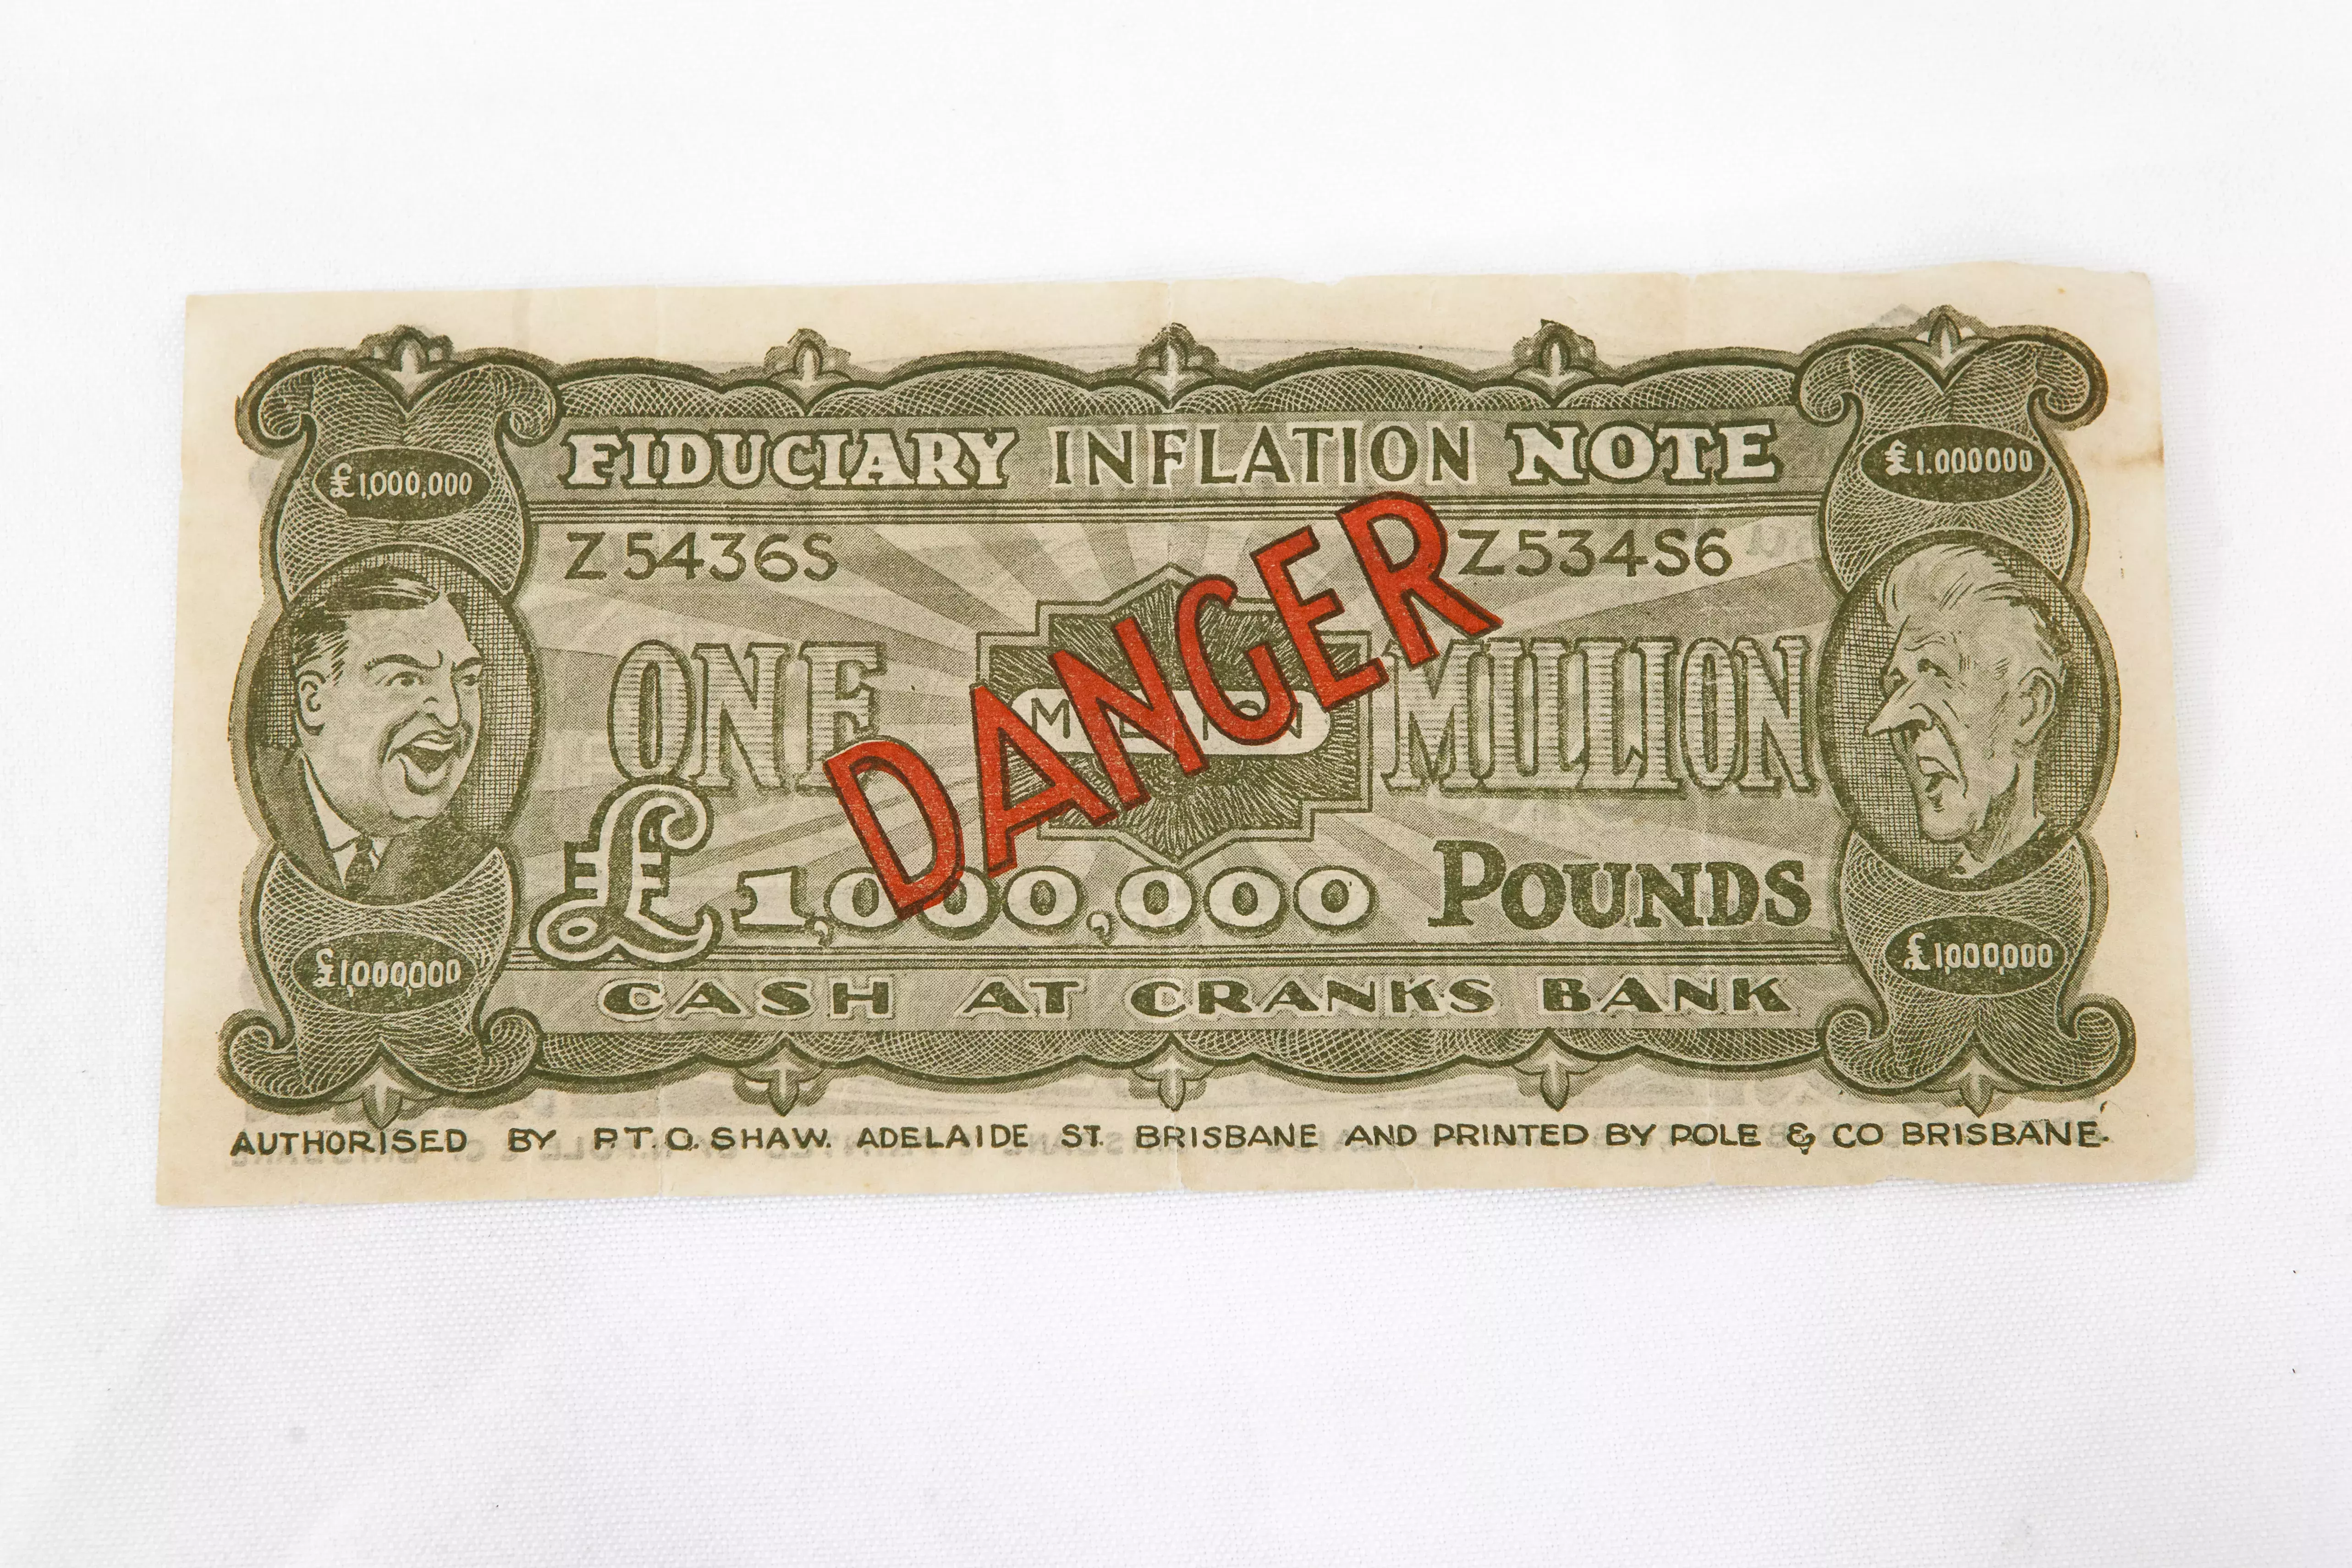 A million pound bank note with the word 'danger' in red text in the middle.  